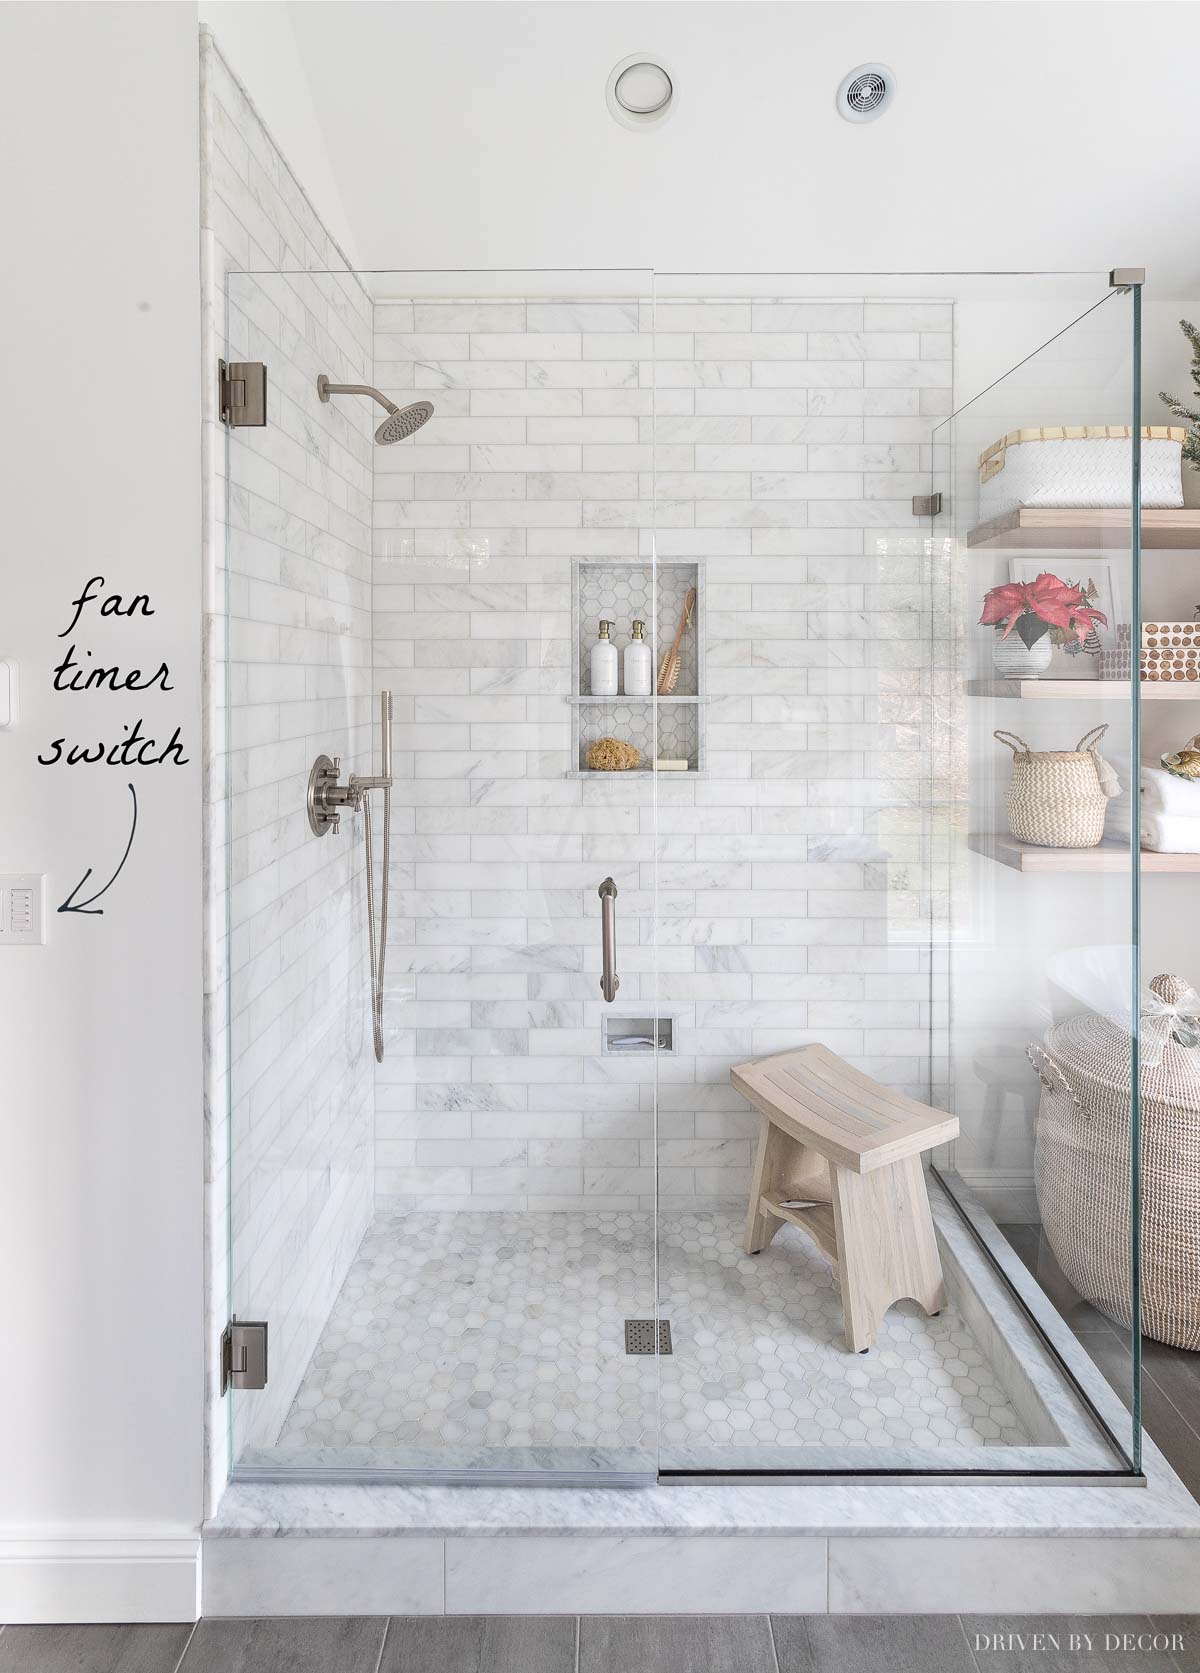 9 Of The Best Master Bathroom Must Haves? - Frei Remodeling